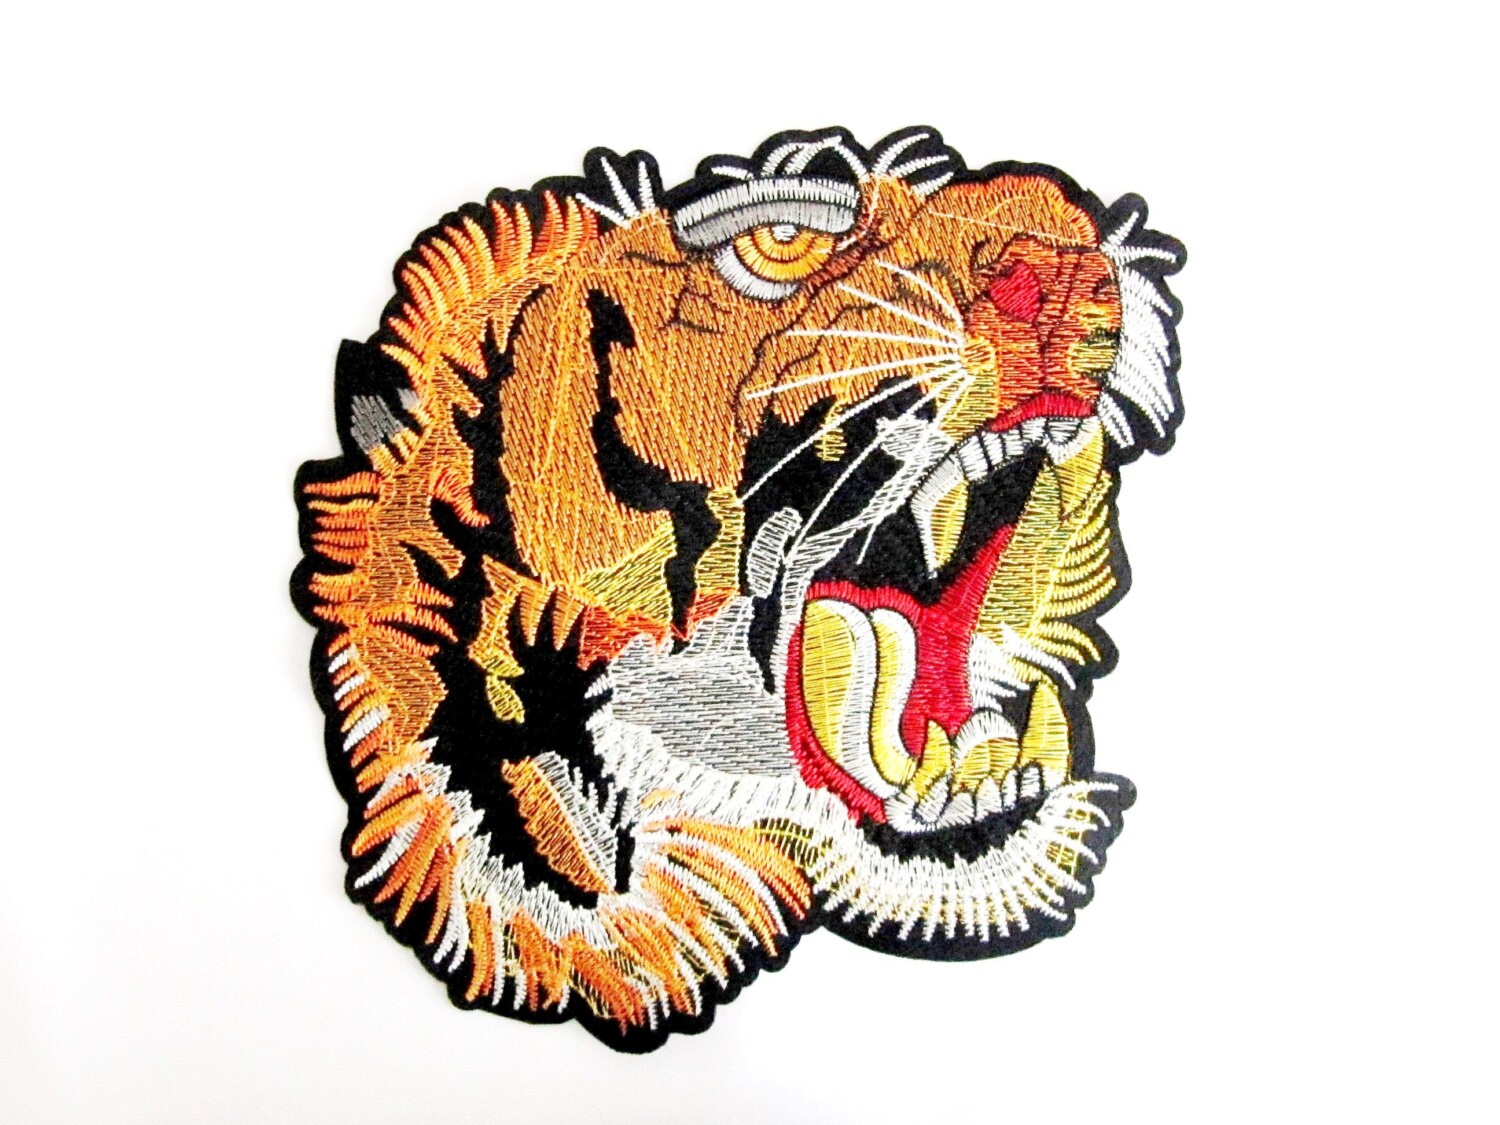 Download Iron On Laculo Tiger PatchBack patch Large Tiger Head Patch